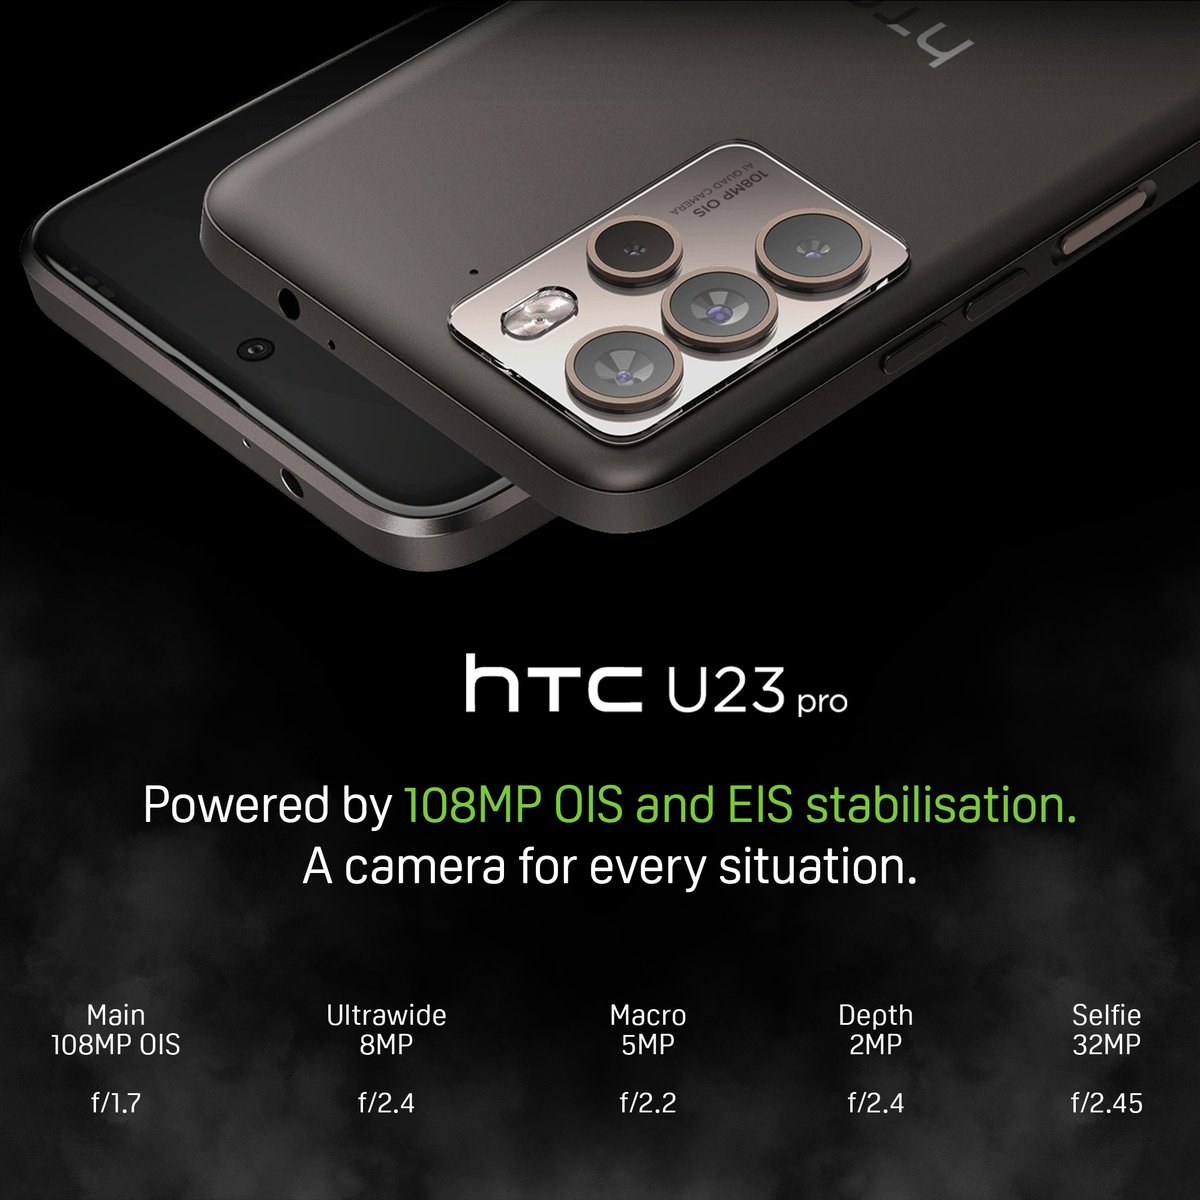 Capture moments to last an eternity. 108MP OIS main camera, 120Hz OLED display, 12GB RAM, 256GB expandable storage with microSD, 3.5mm audio jack, IP67 rating and all-day battery. Save on the HTC U23 pro in our Spring Sale 📸 htc.com/uk/smartphones… #HTC #SmartphoneSale